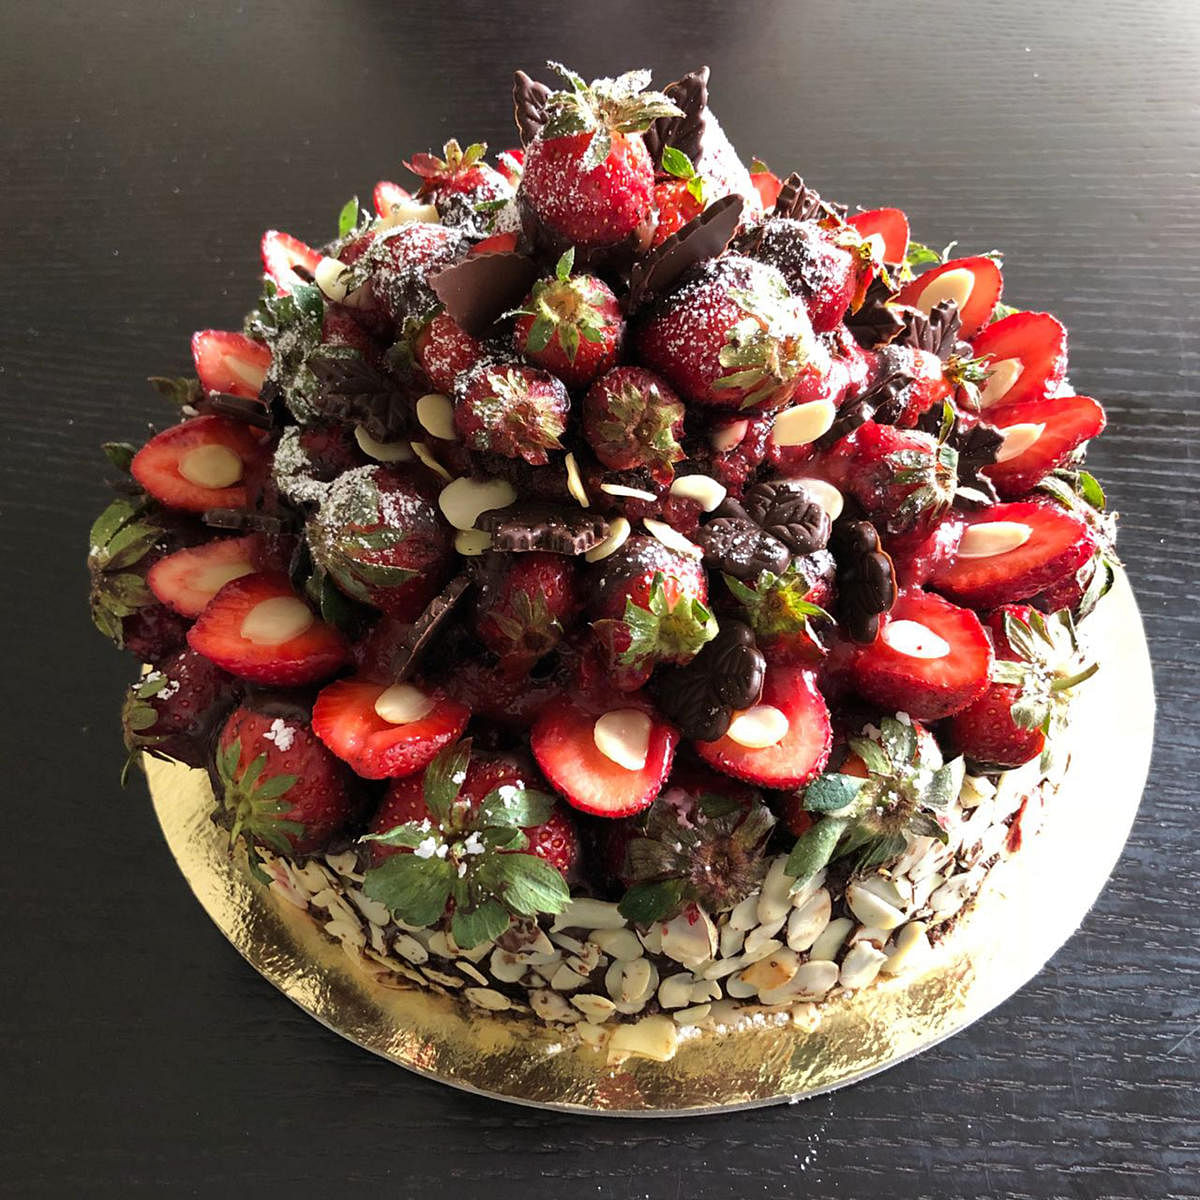 A chocolate, nuts and strawberry cake.